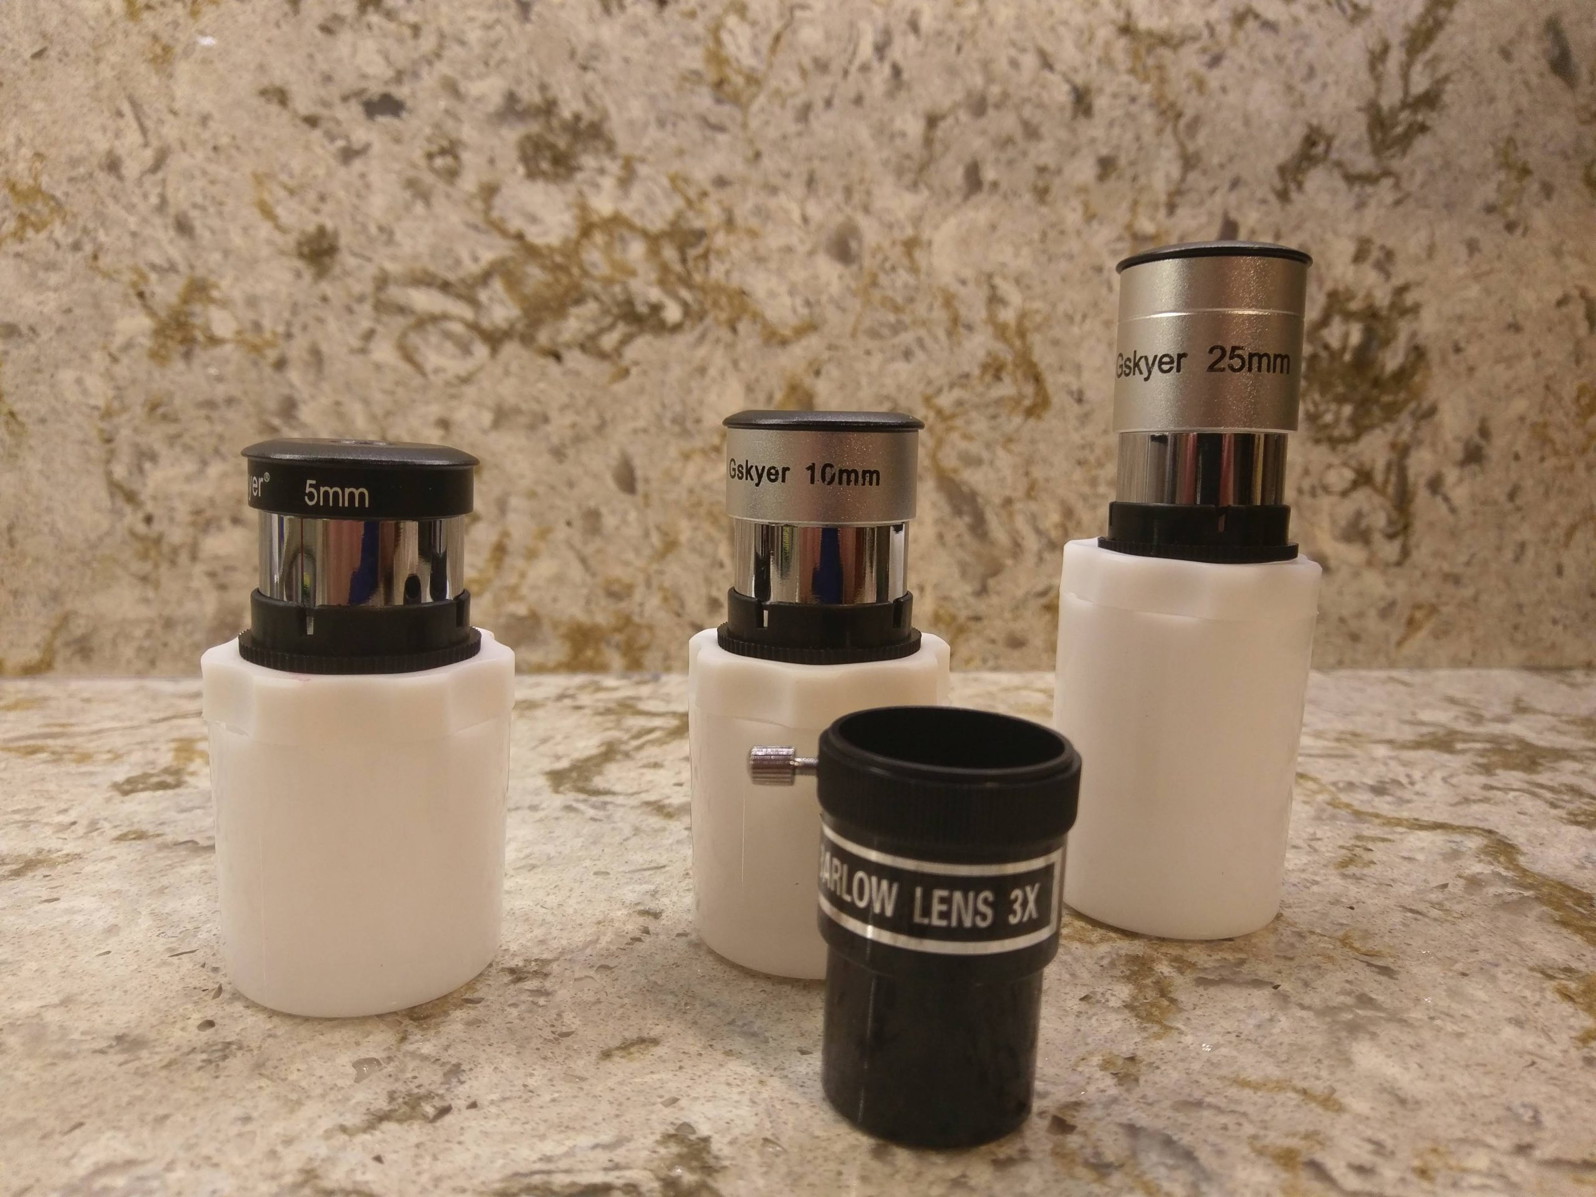 Three eyepieces and one barlow lens